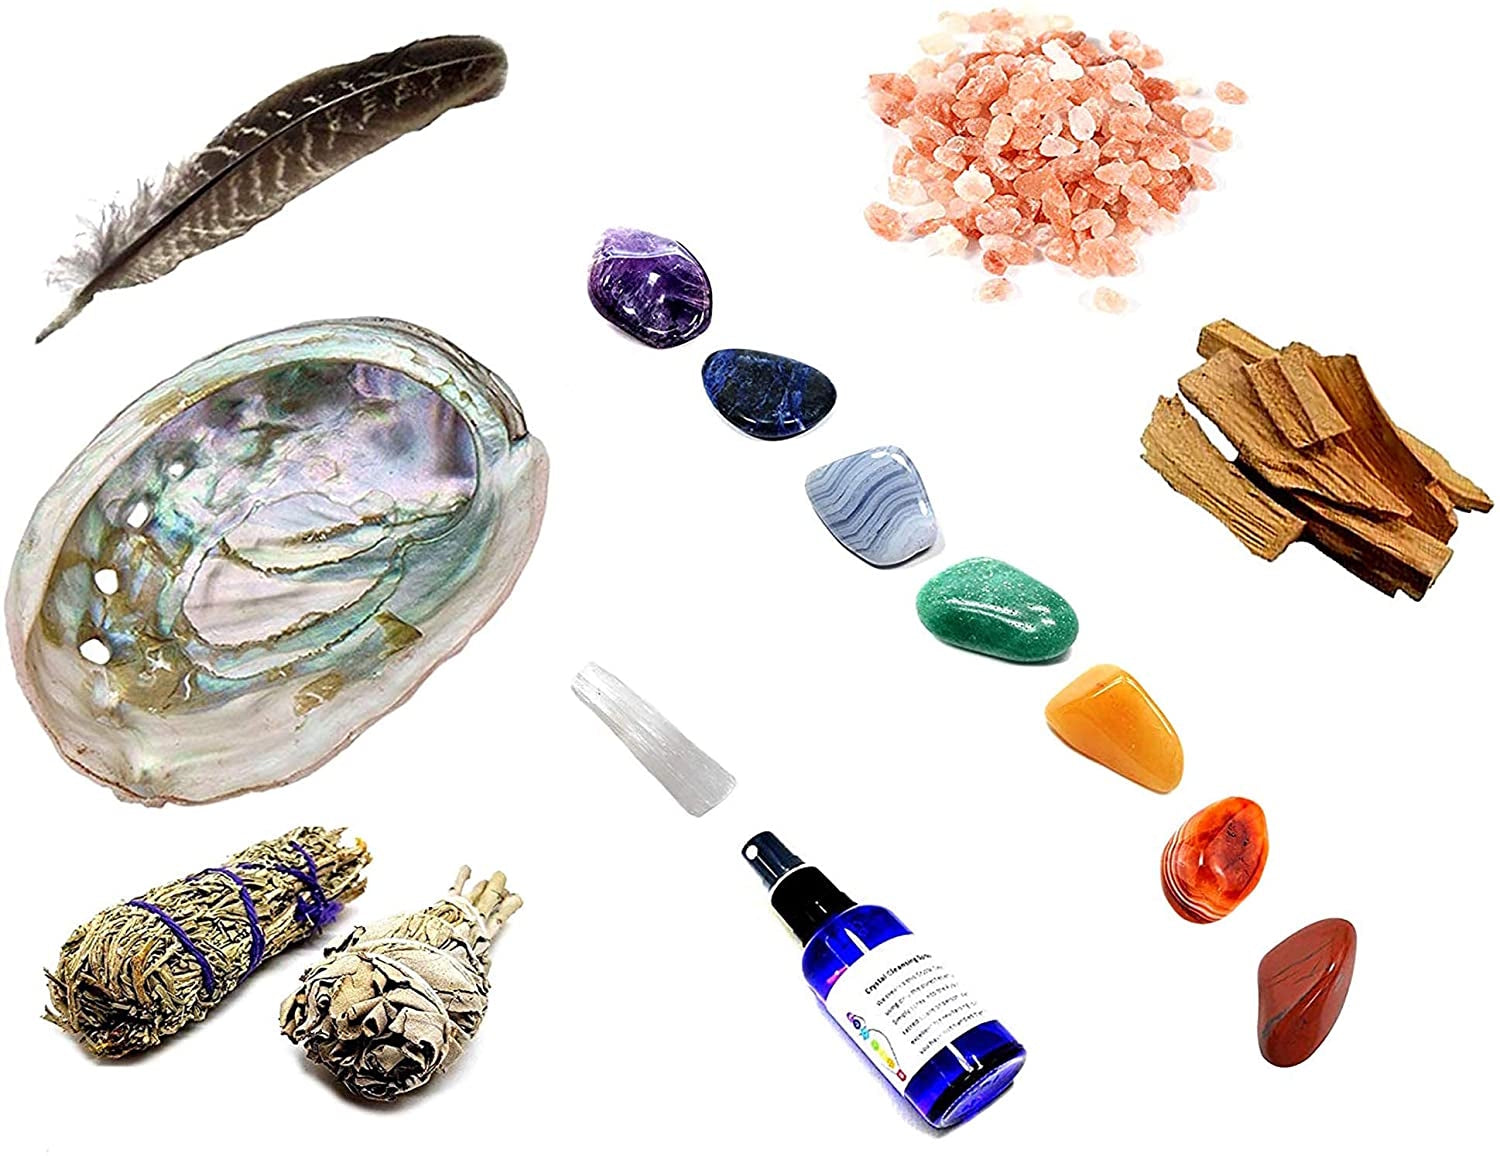 5 Information booklets, feather, 2 sage, spray bottle, 7 crystals are green, red, purple, white and orange